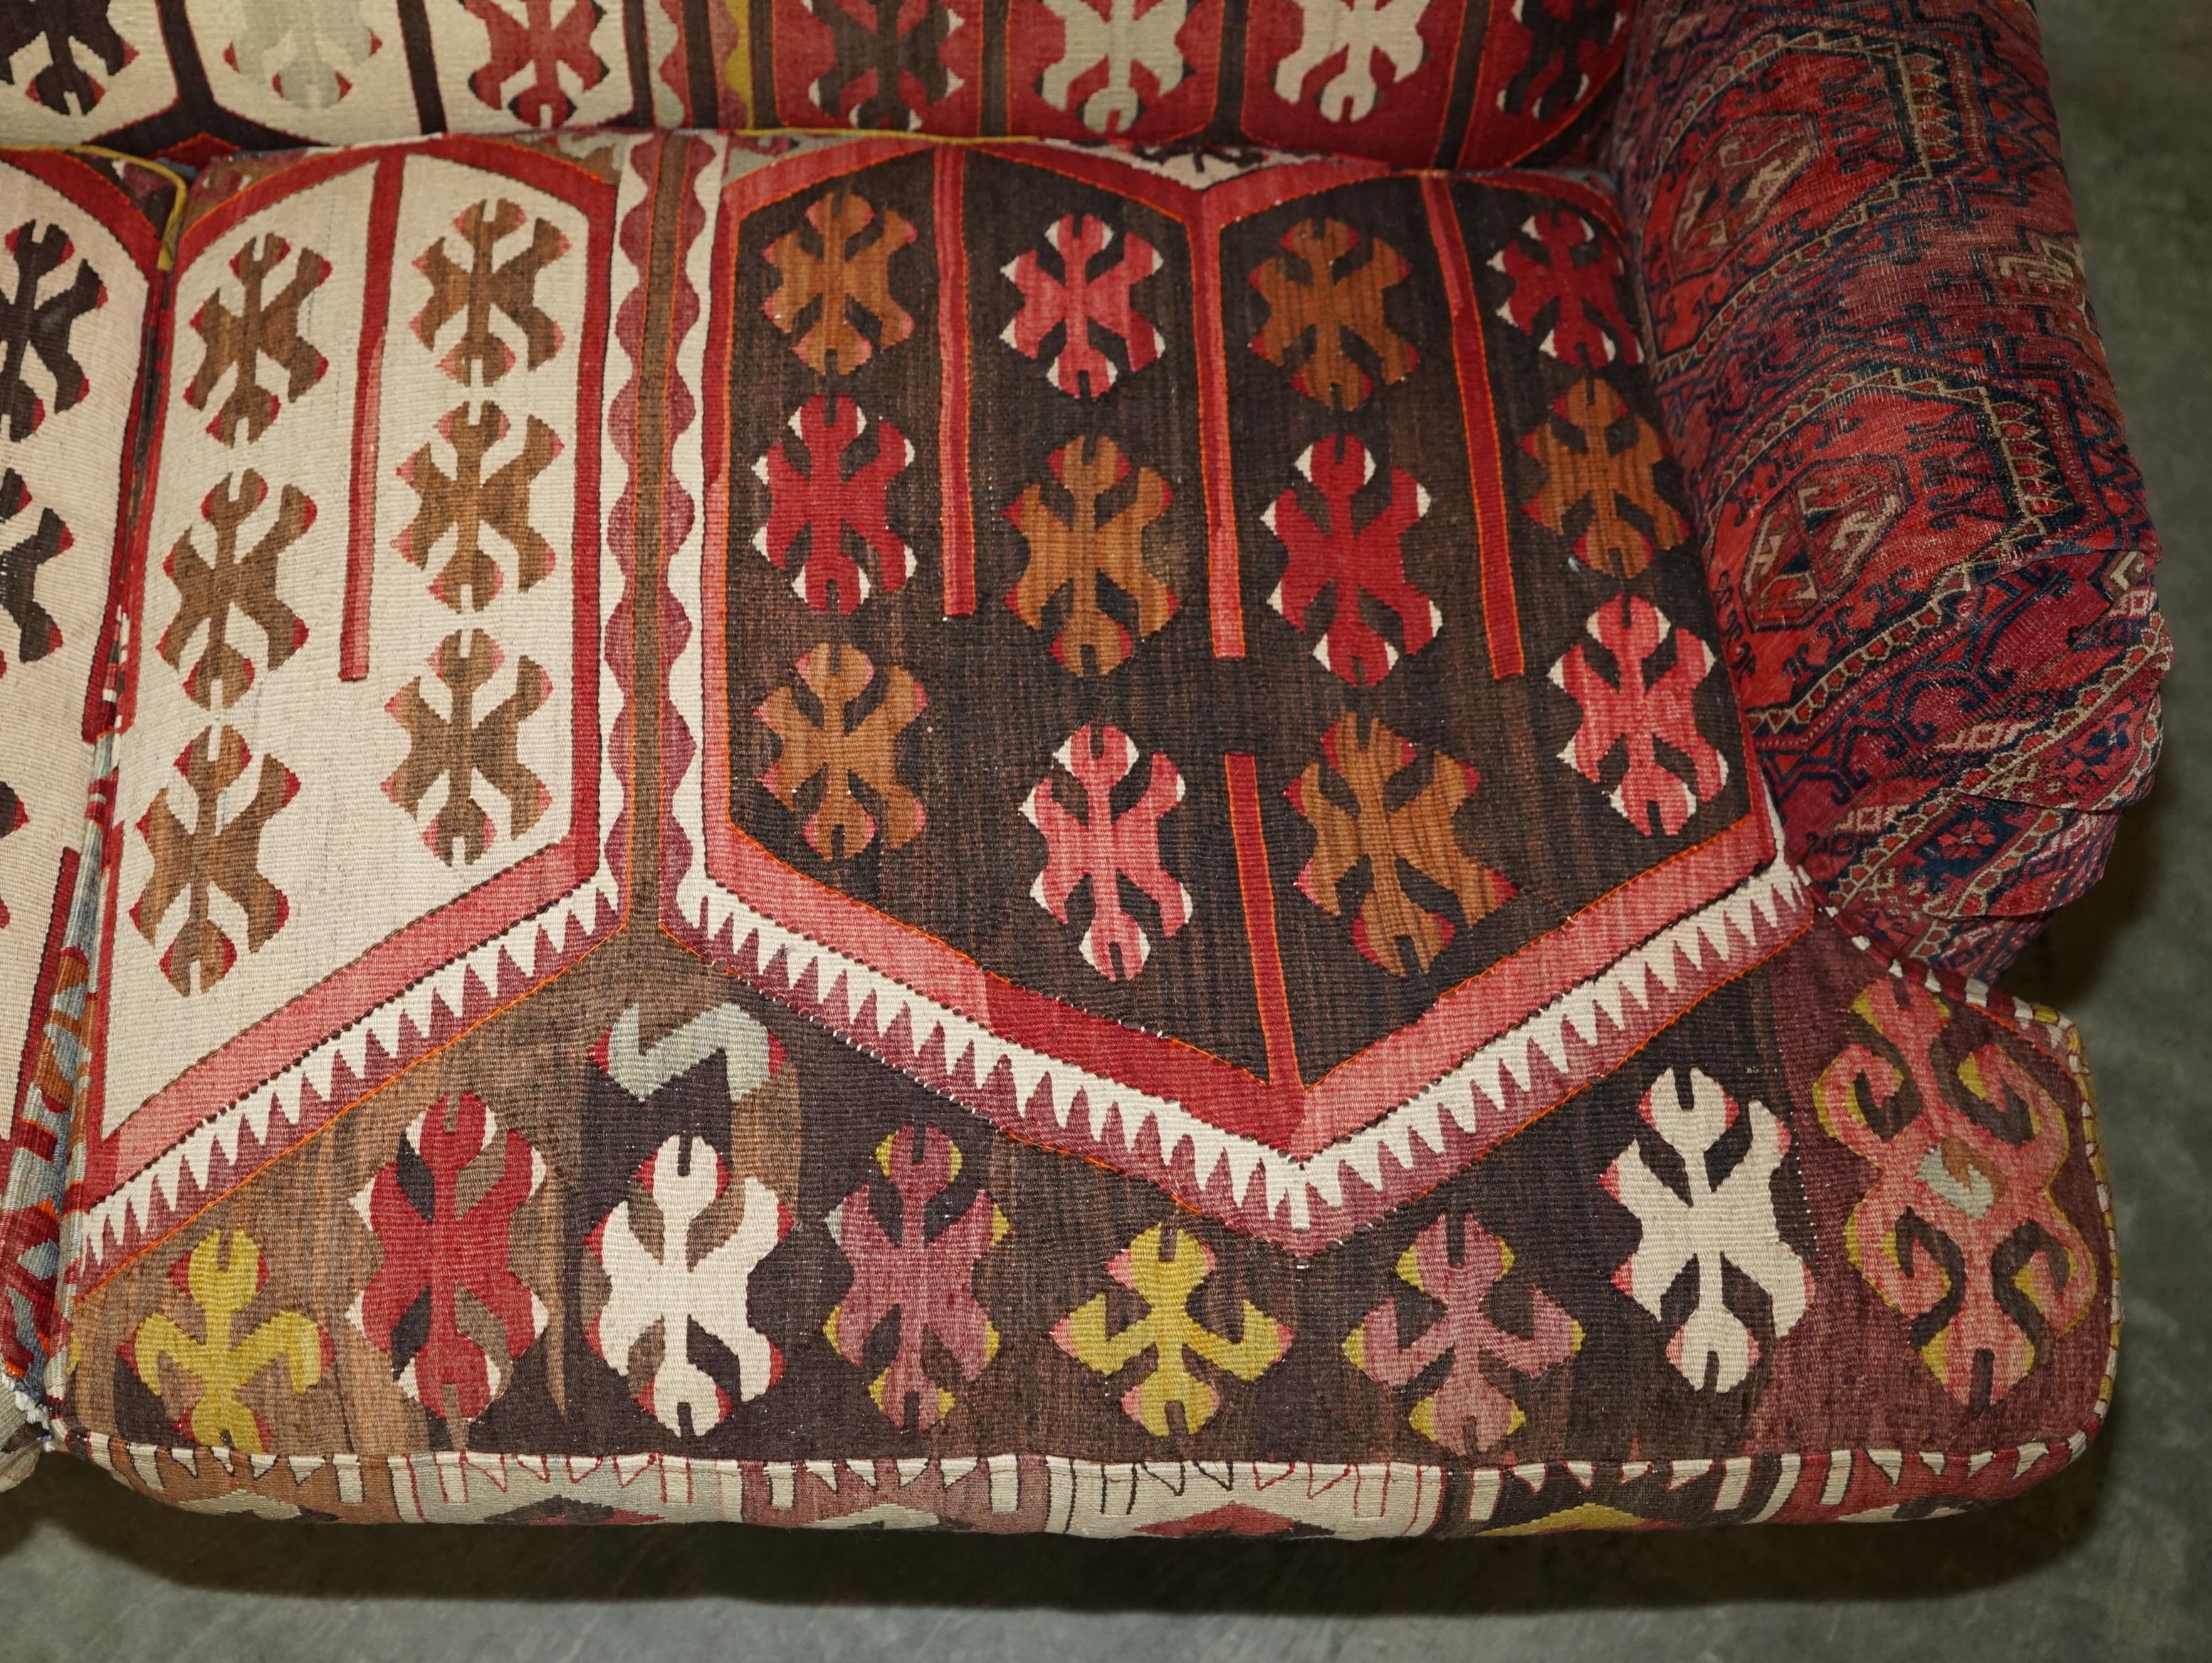 FINE ViNTAGE GEORGE SMITH HOWARD & SON'S STYLE KILIM UPHOLSTERED TWO SEATER SOFA 1